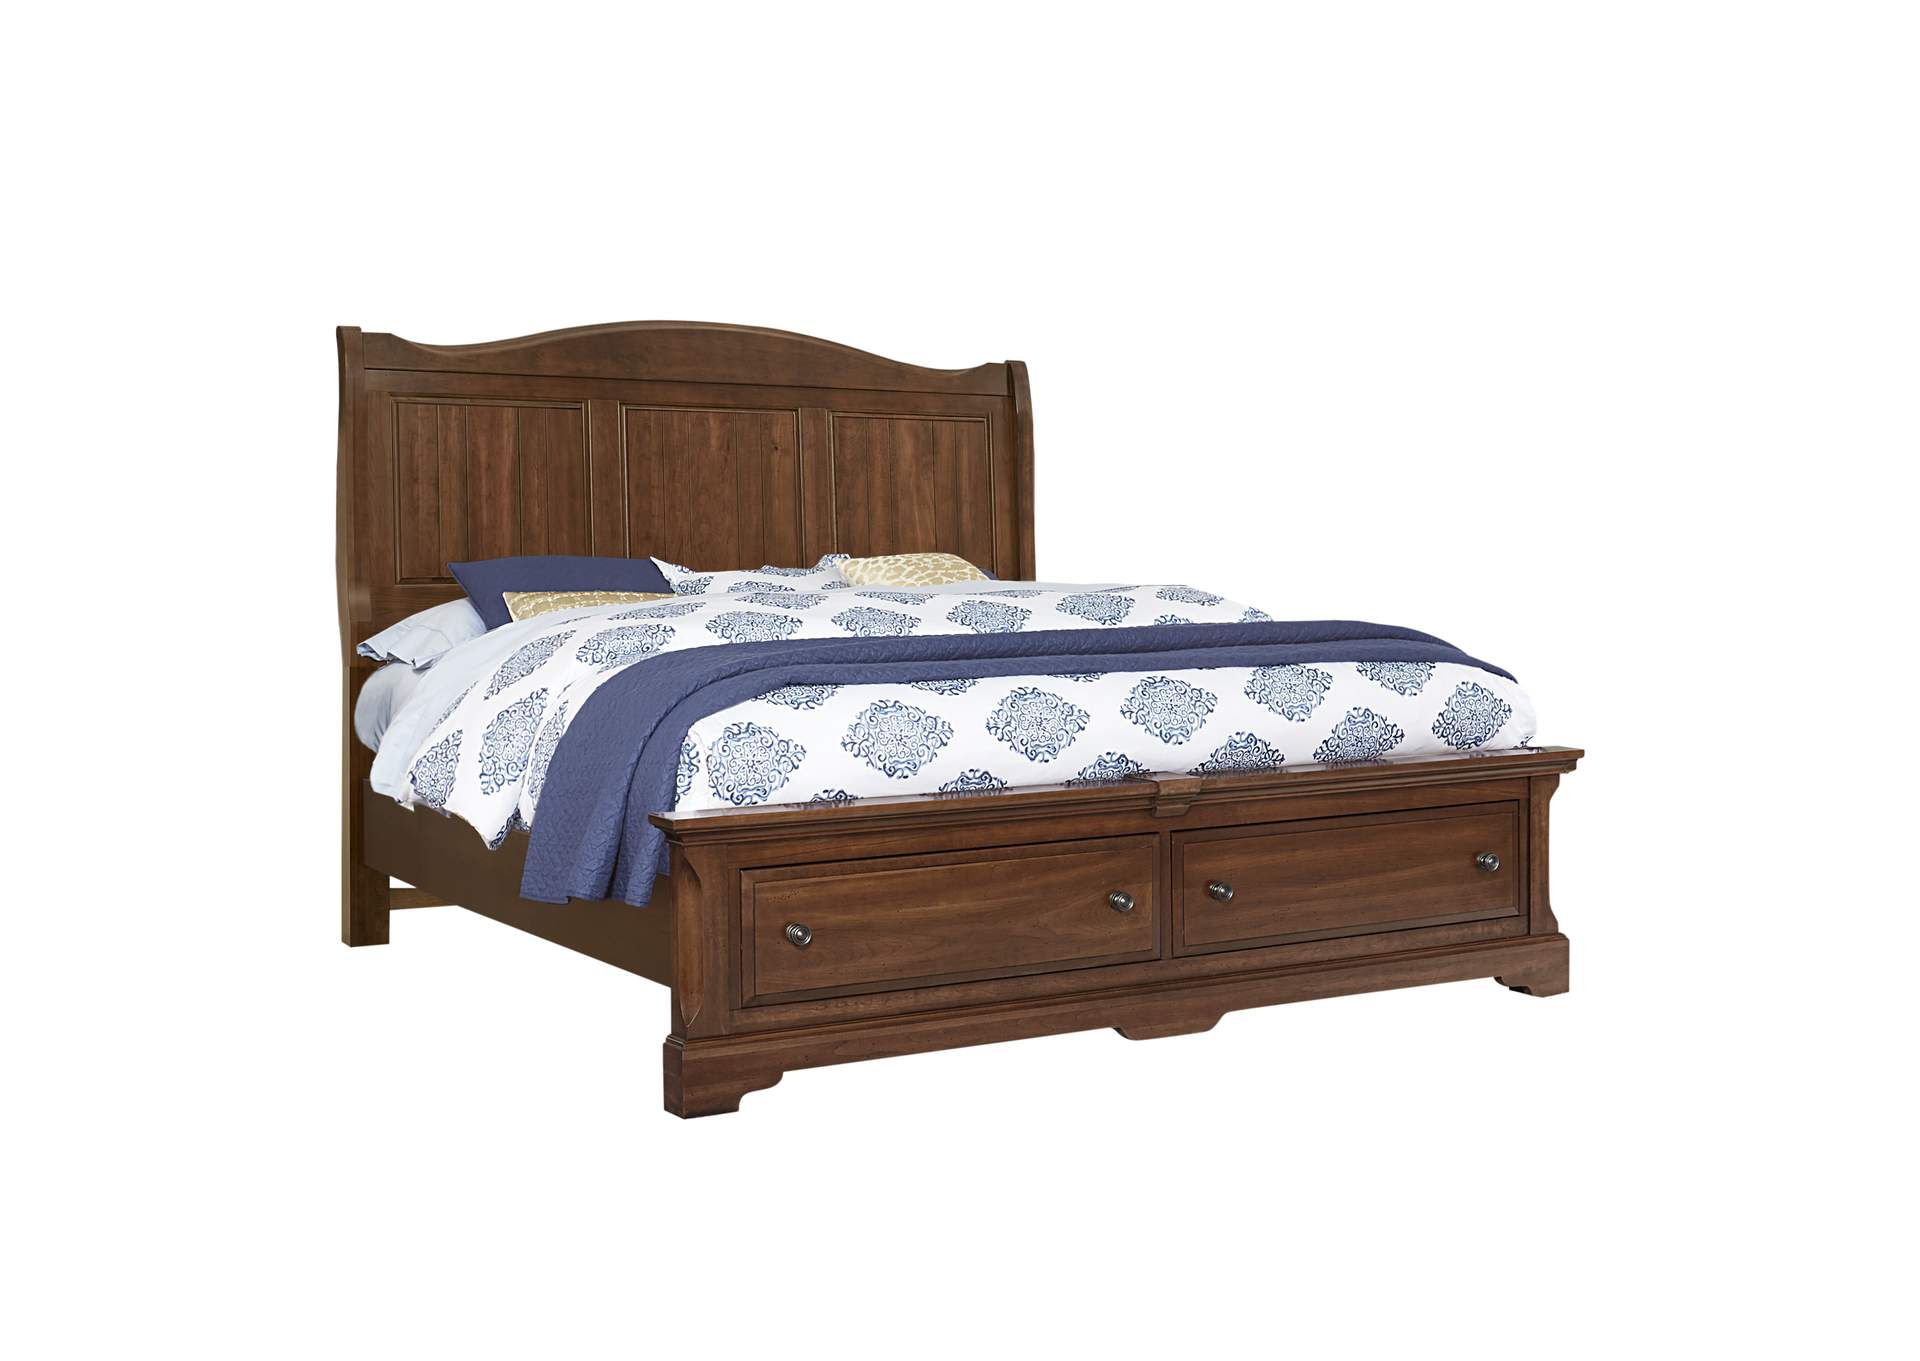 Heritage Amish Cherry King Sleigh Bed, Vaughan Bassett King Sleigh Bed